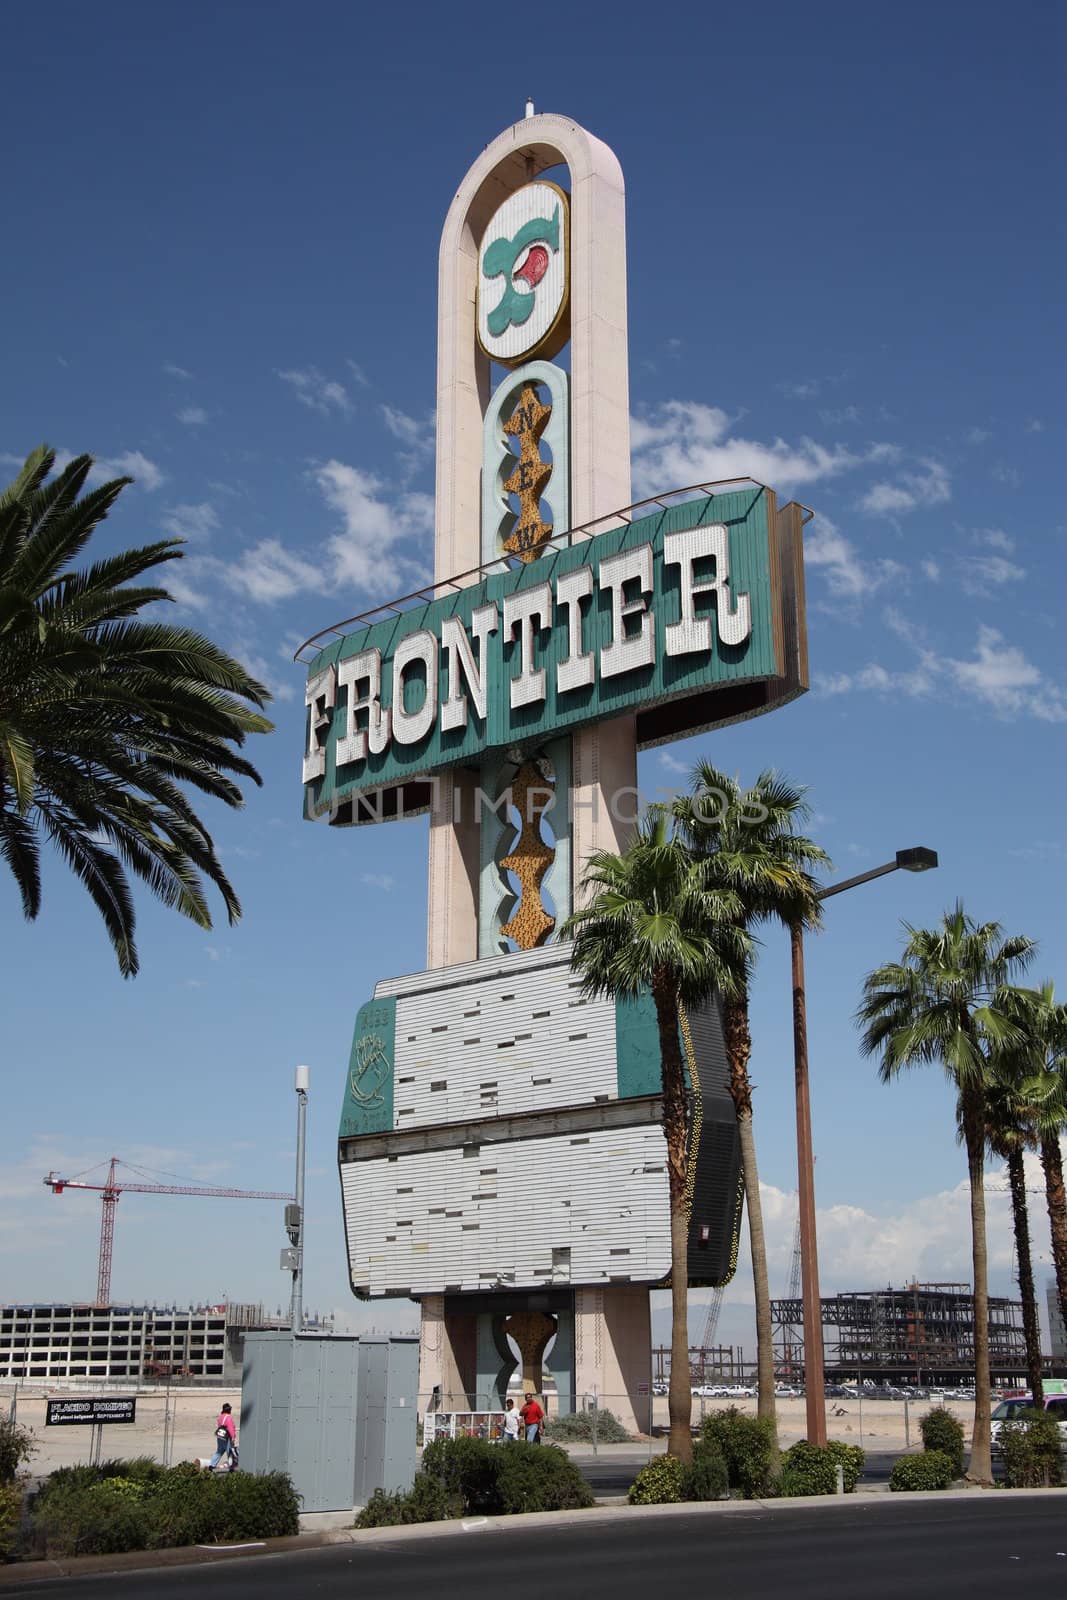 Las Vegas - Frontier Hotel Marquee by Ffooter